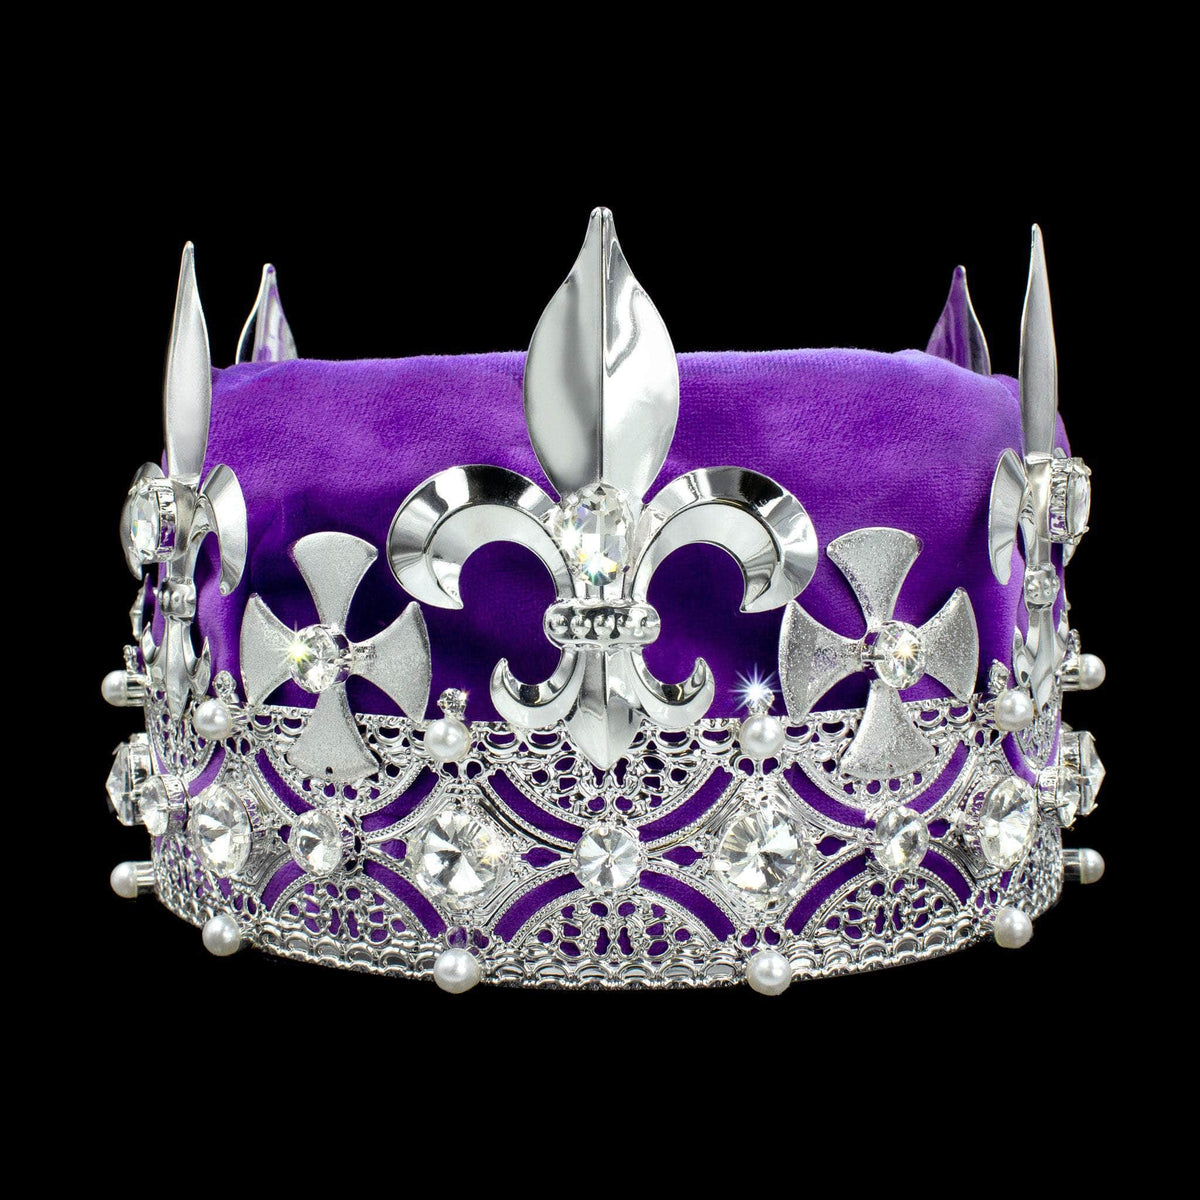 King's Crown #17404XS-PURP Crystal Silver